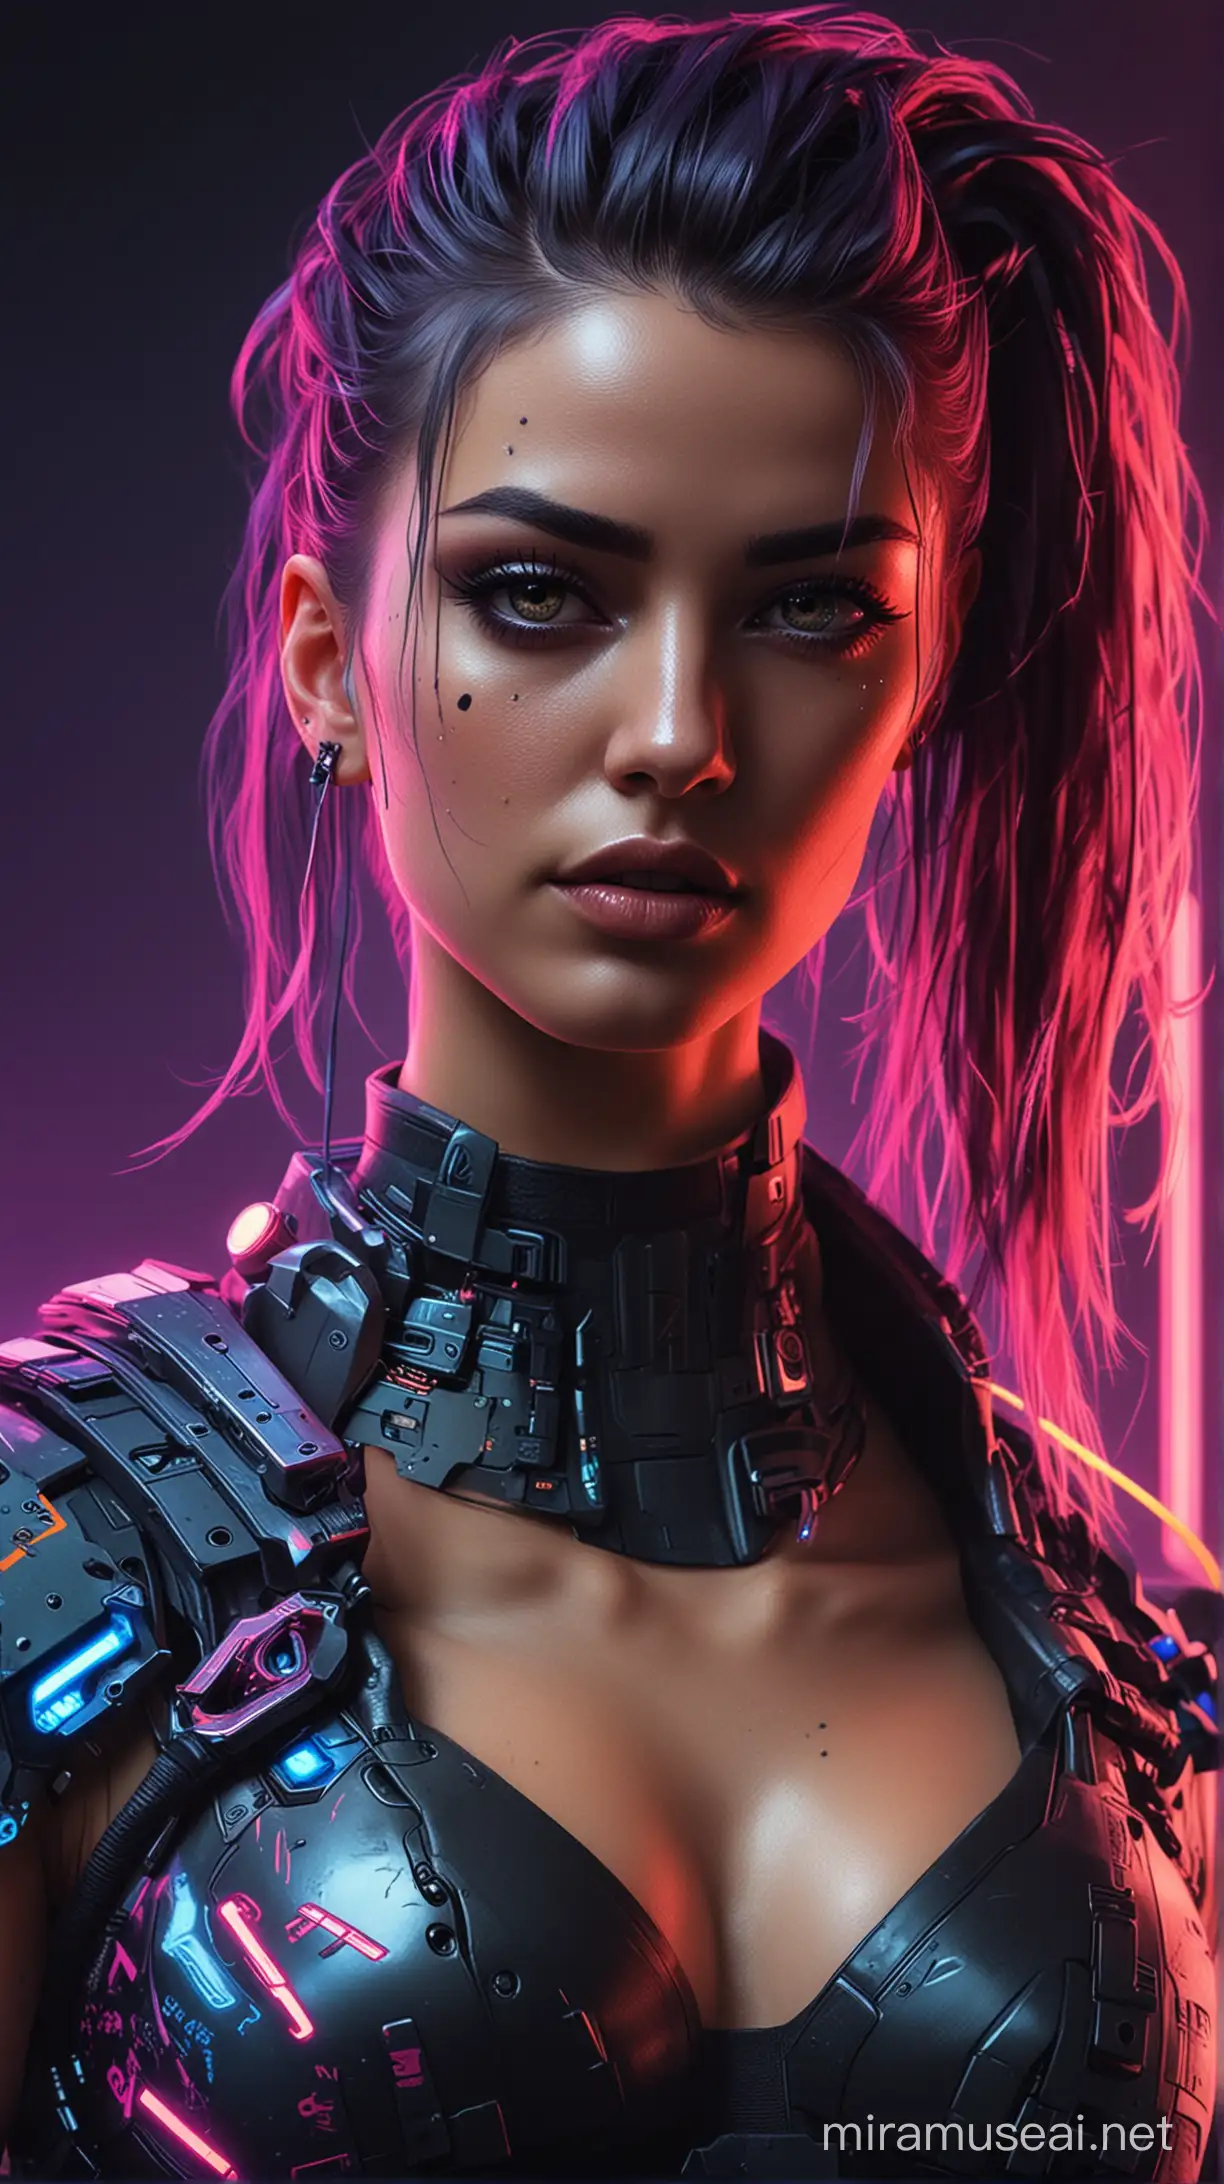 Cyberpunk Woman Surrounded by Neon Lights